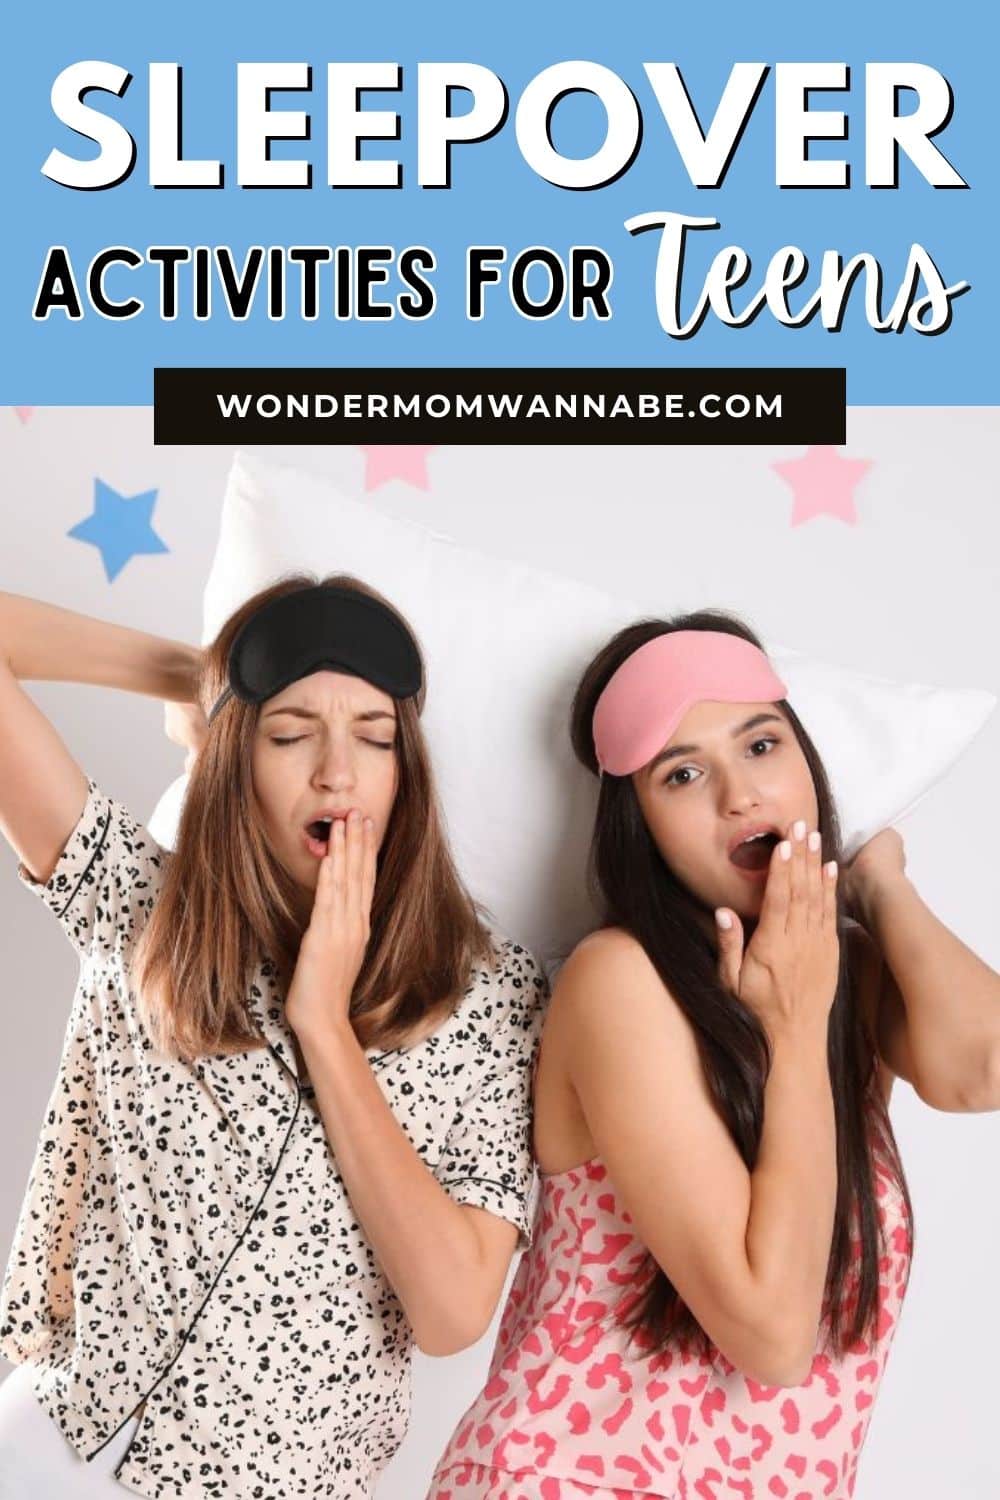 Sleepover activities for teens are essential to keep them entertained while spending the night at a friend's house. Engaging in fun and age-appropriate sleepover activities for teens can create lasting memories and strengthen